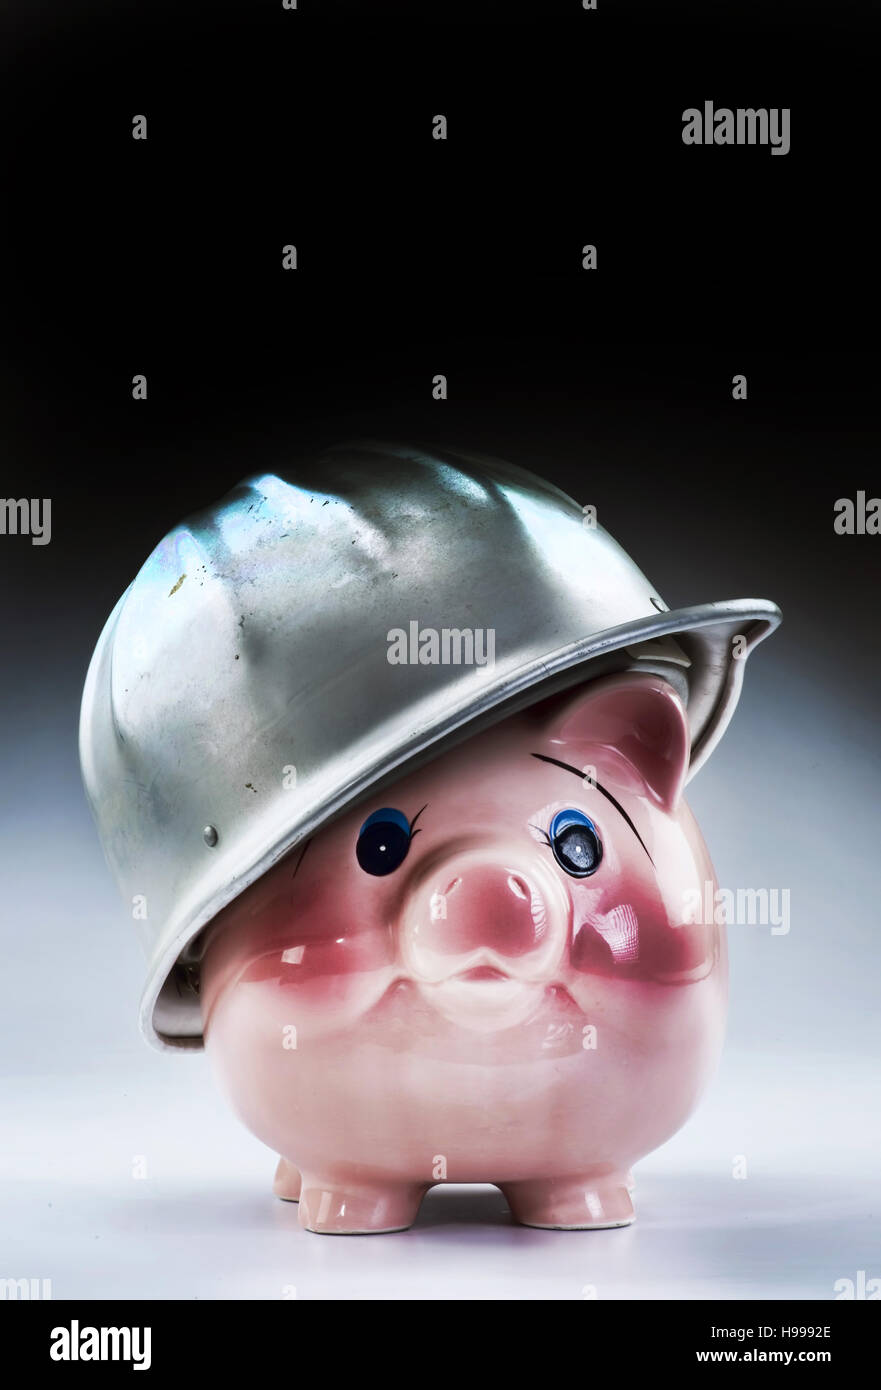 Hard hat piggy at work with room for your type. Stock Photo